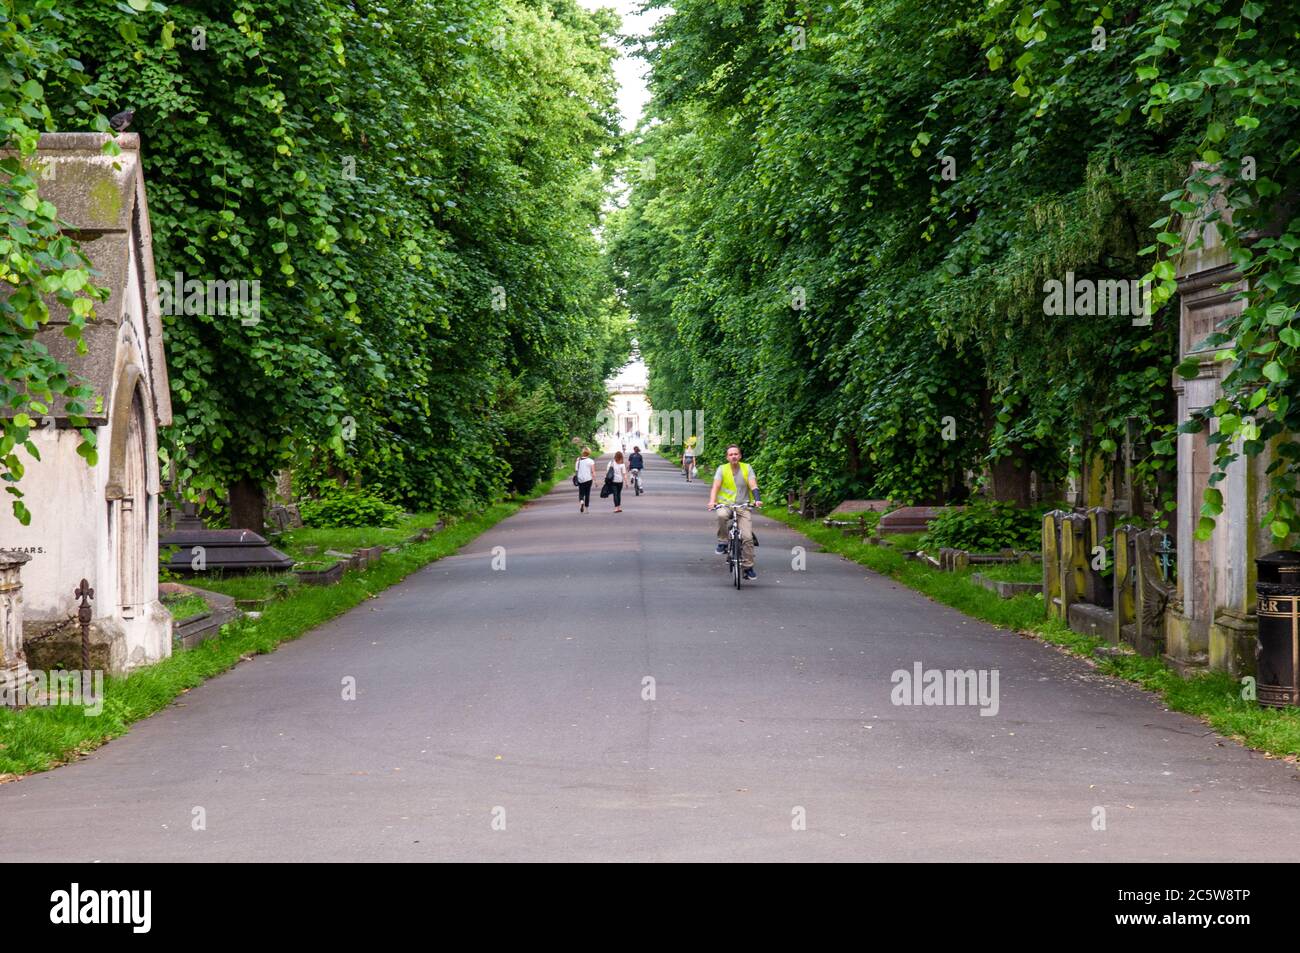 London, England, UK - June 18, 2013: Cyclists and pedestrians travel through the wooded Brompton Cemetery in west London. Stock Photo